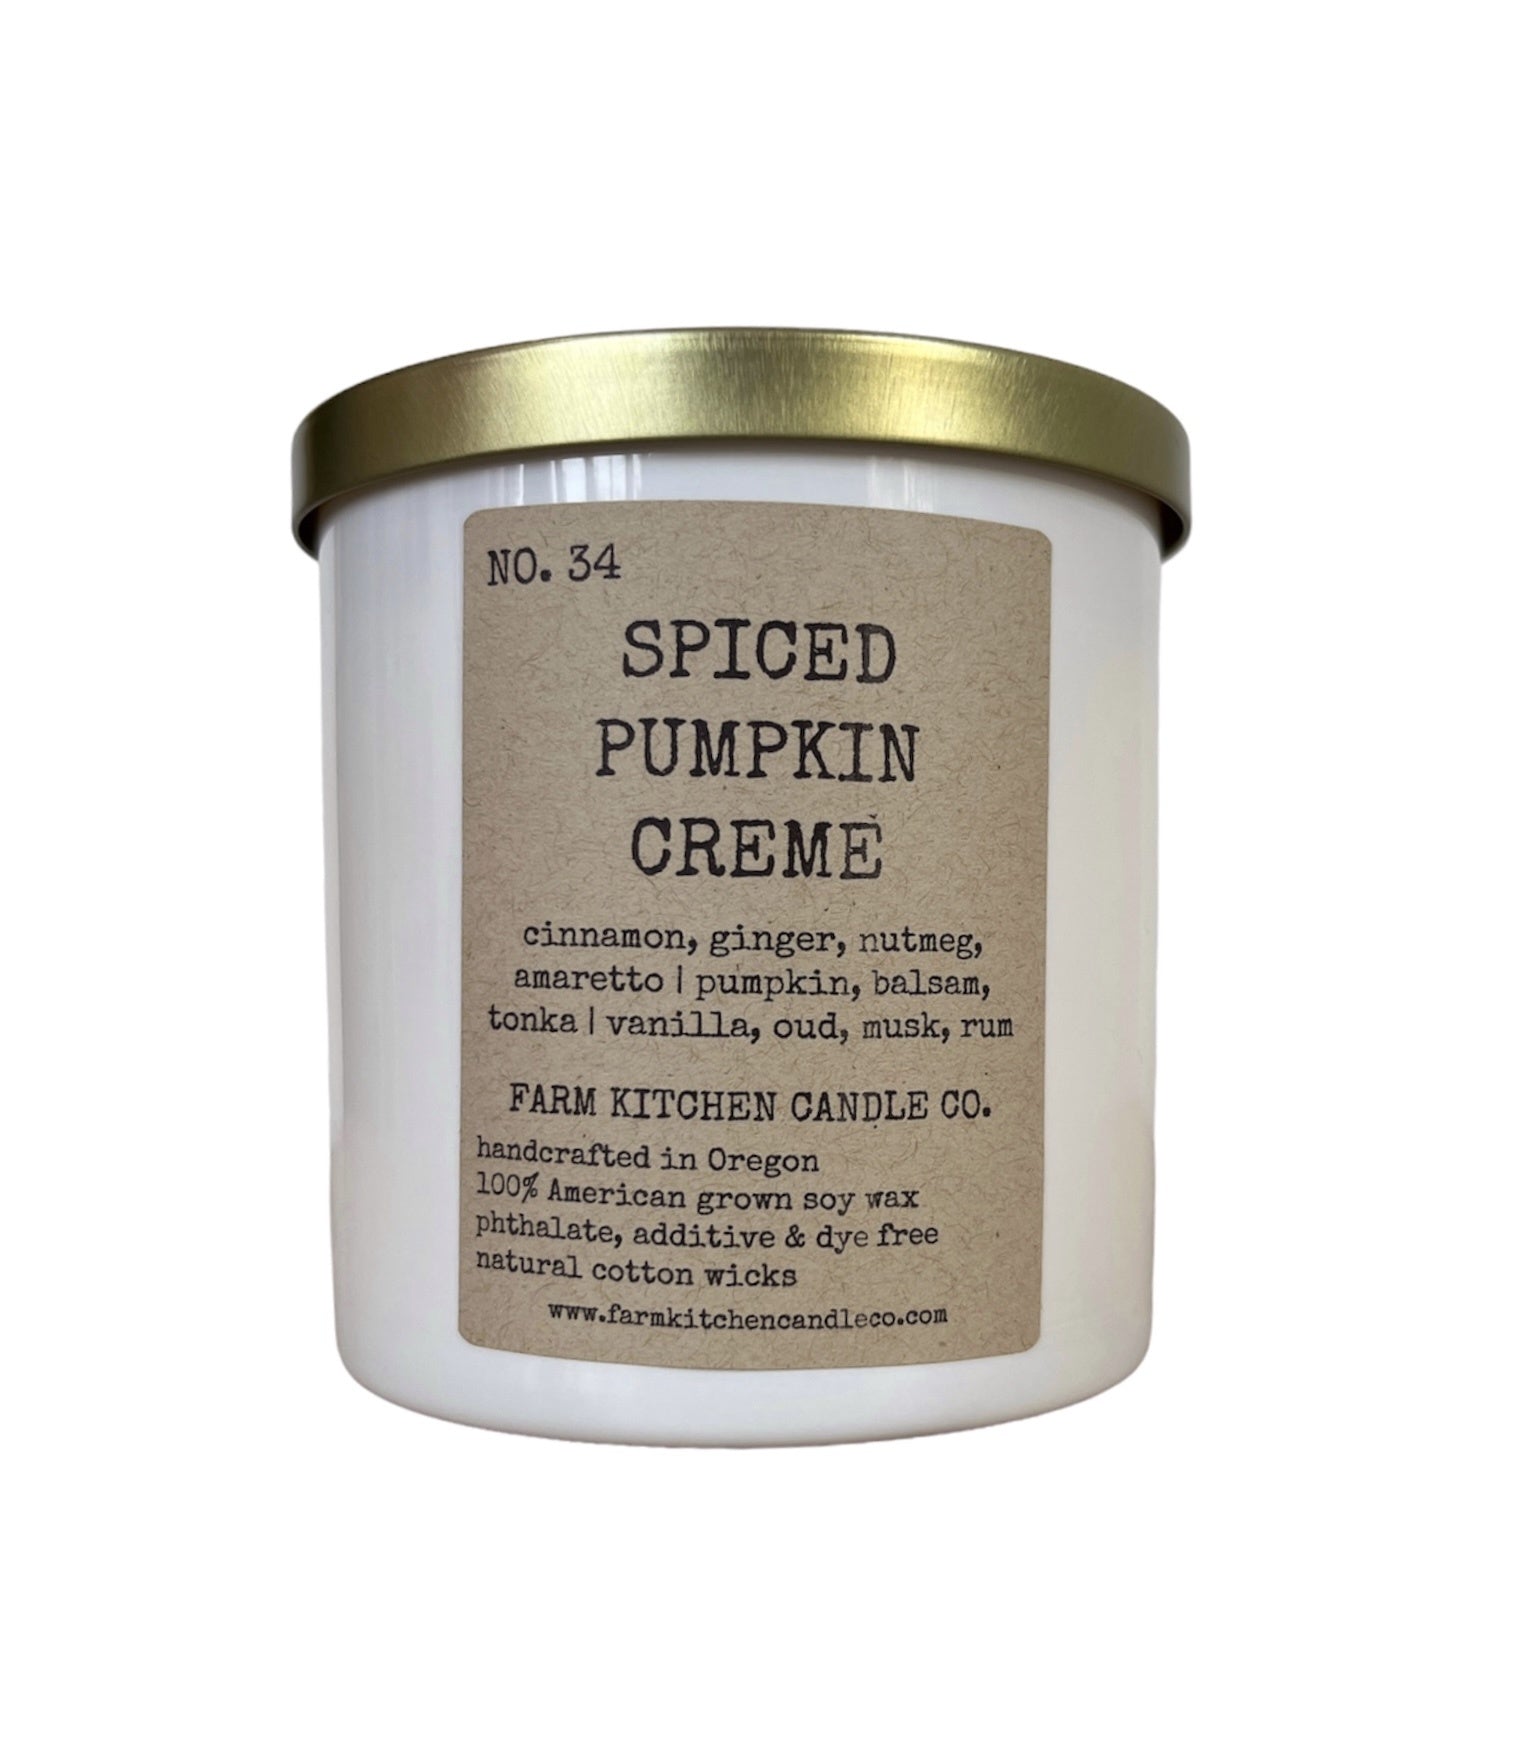 FARM KITCHEN CANDLE CO - SINGLE WICK SOY CANDLE IN SPICED PUMPKIN CREME